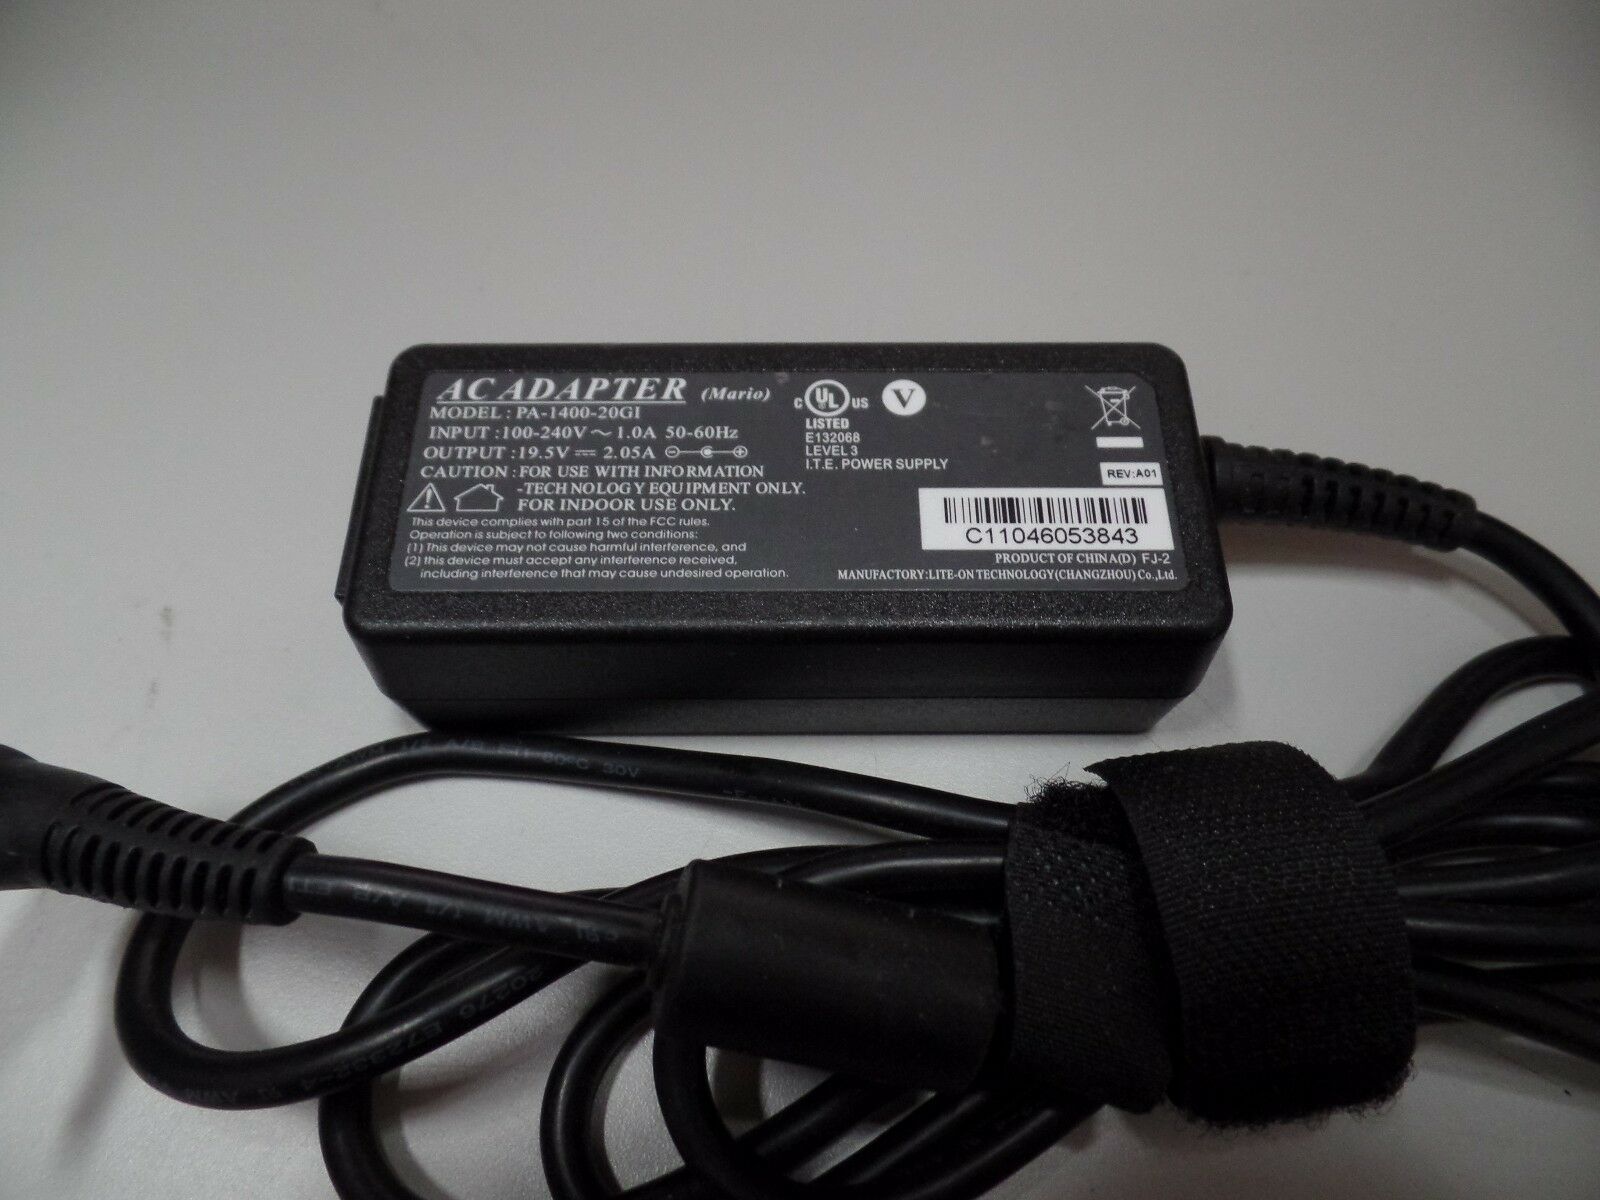 GENUINE MARIO ADAPTER CHARGER 19.5V 2.05A GOOGLE CHROMEBOOK CR-48 PA-1400-20GI Item Specification Manufacturer: Mario M